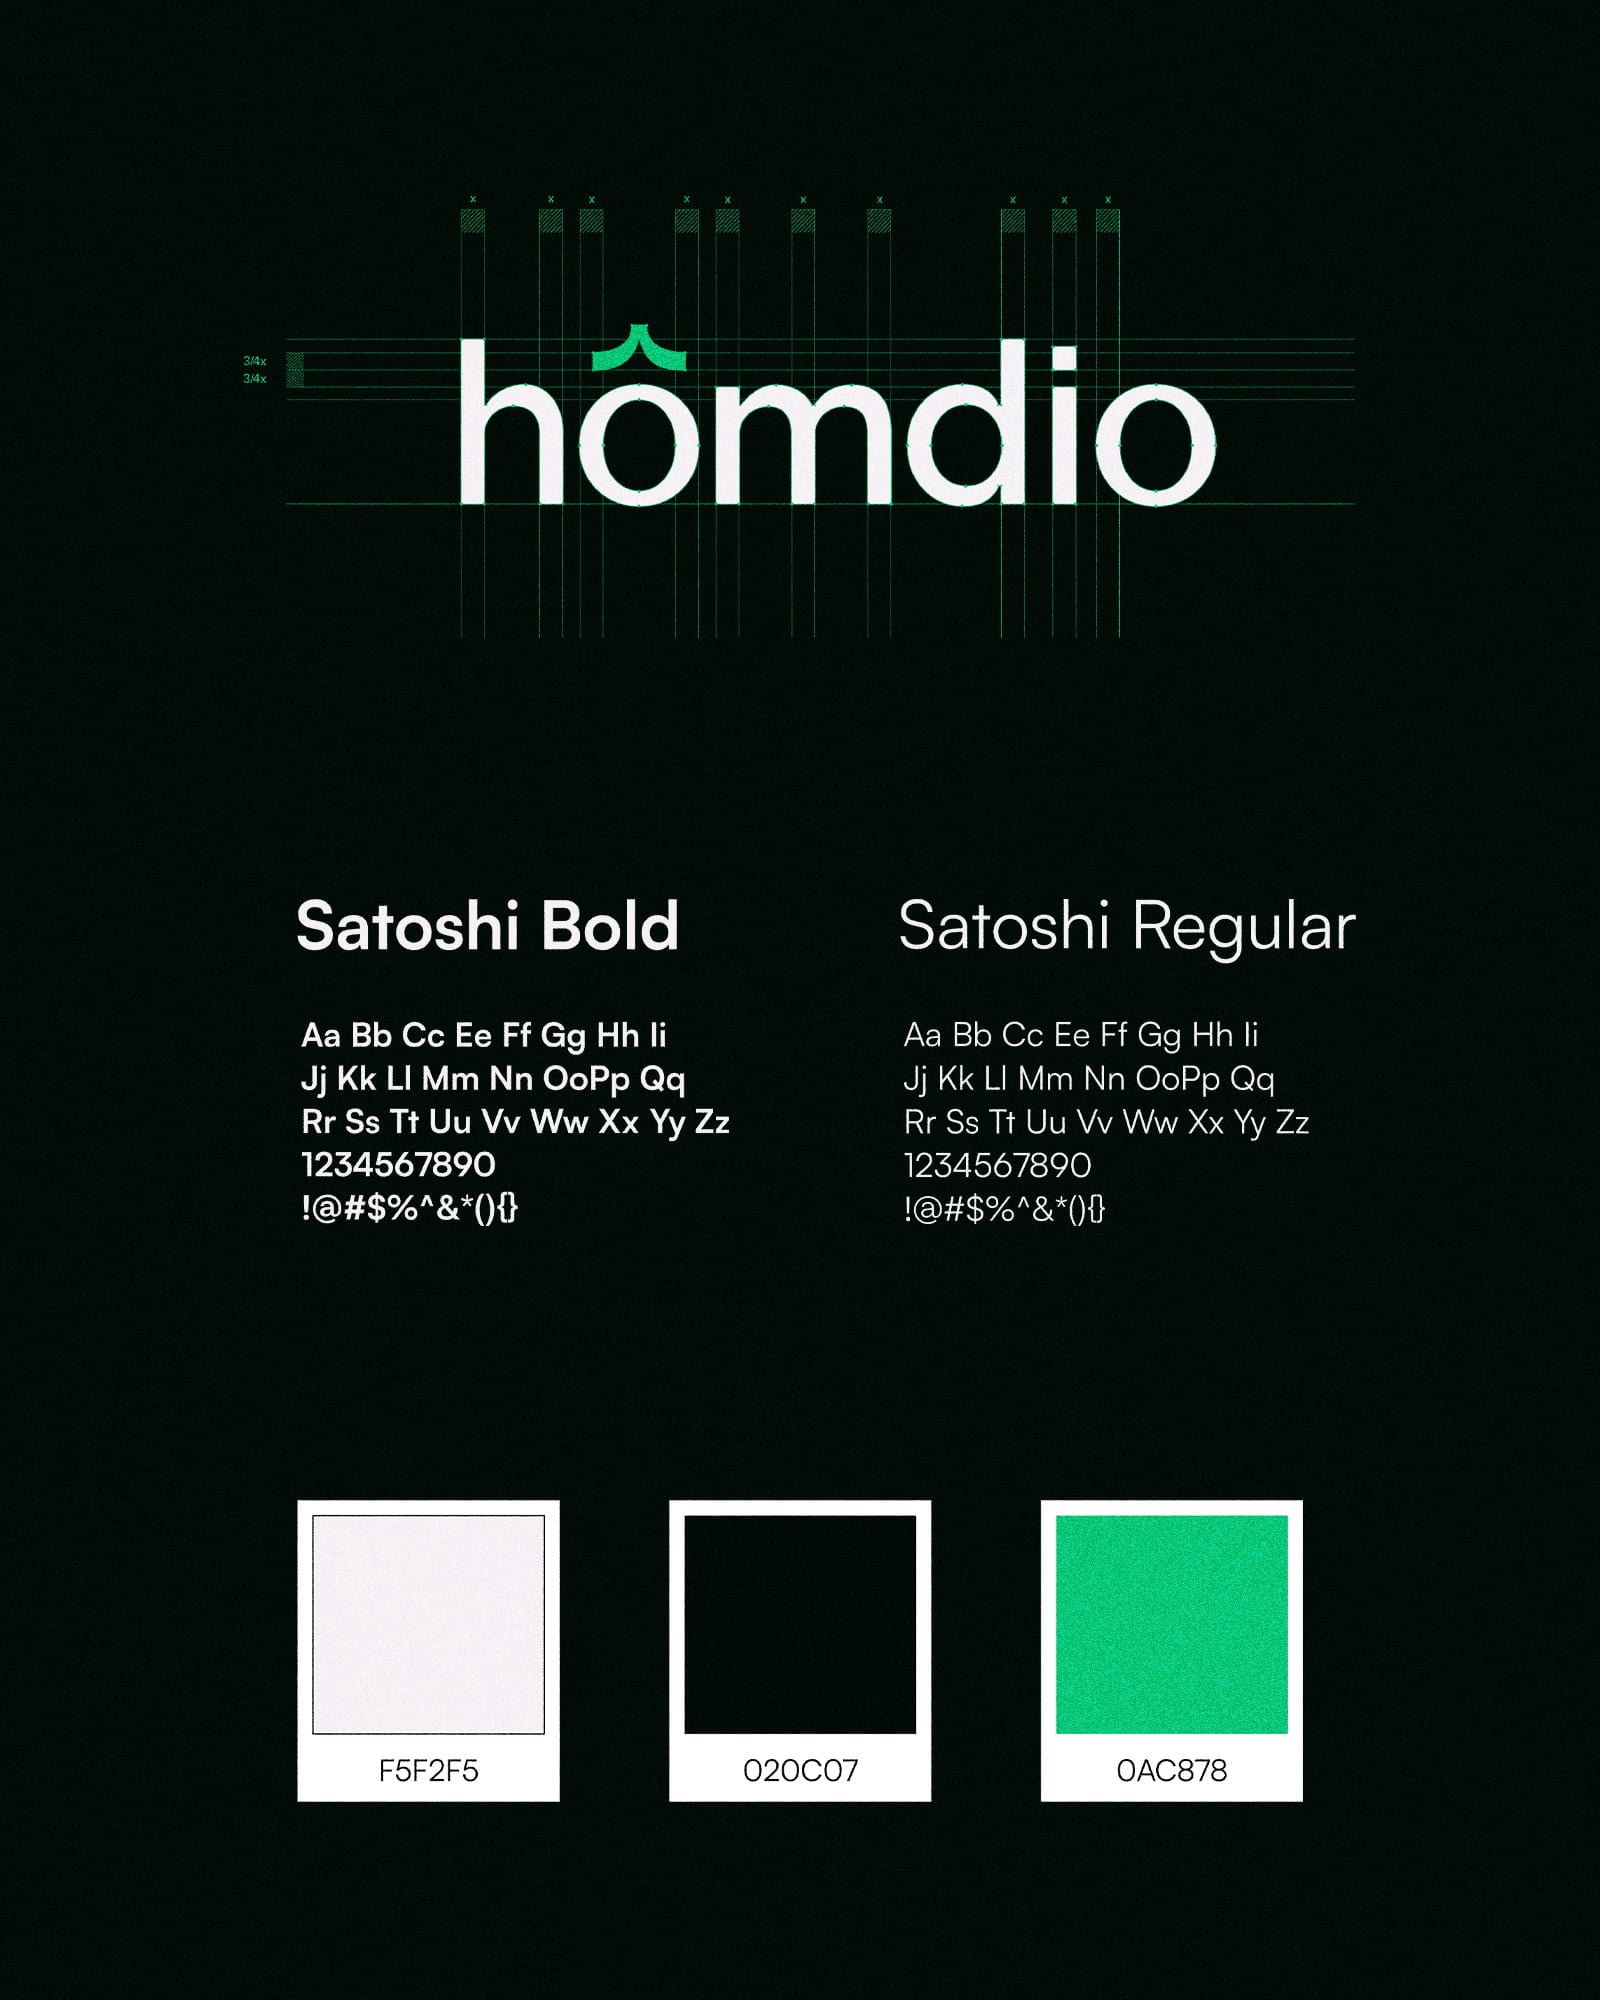 brand identity for a company called homdio that shows logo grid system, typography and color palette